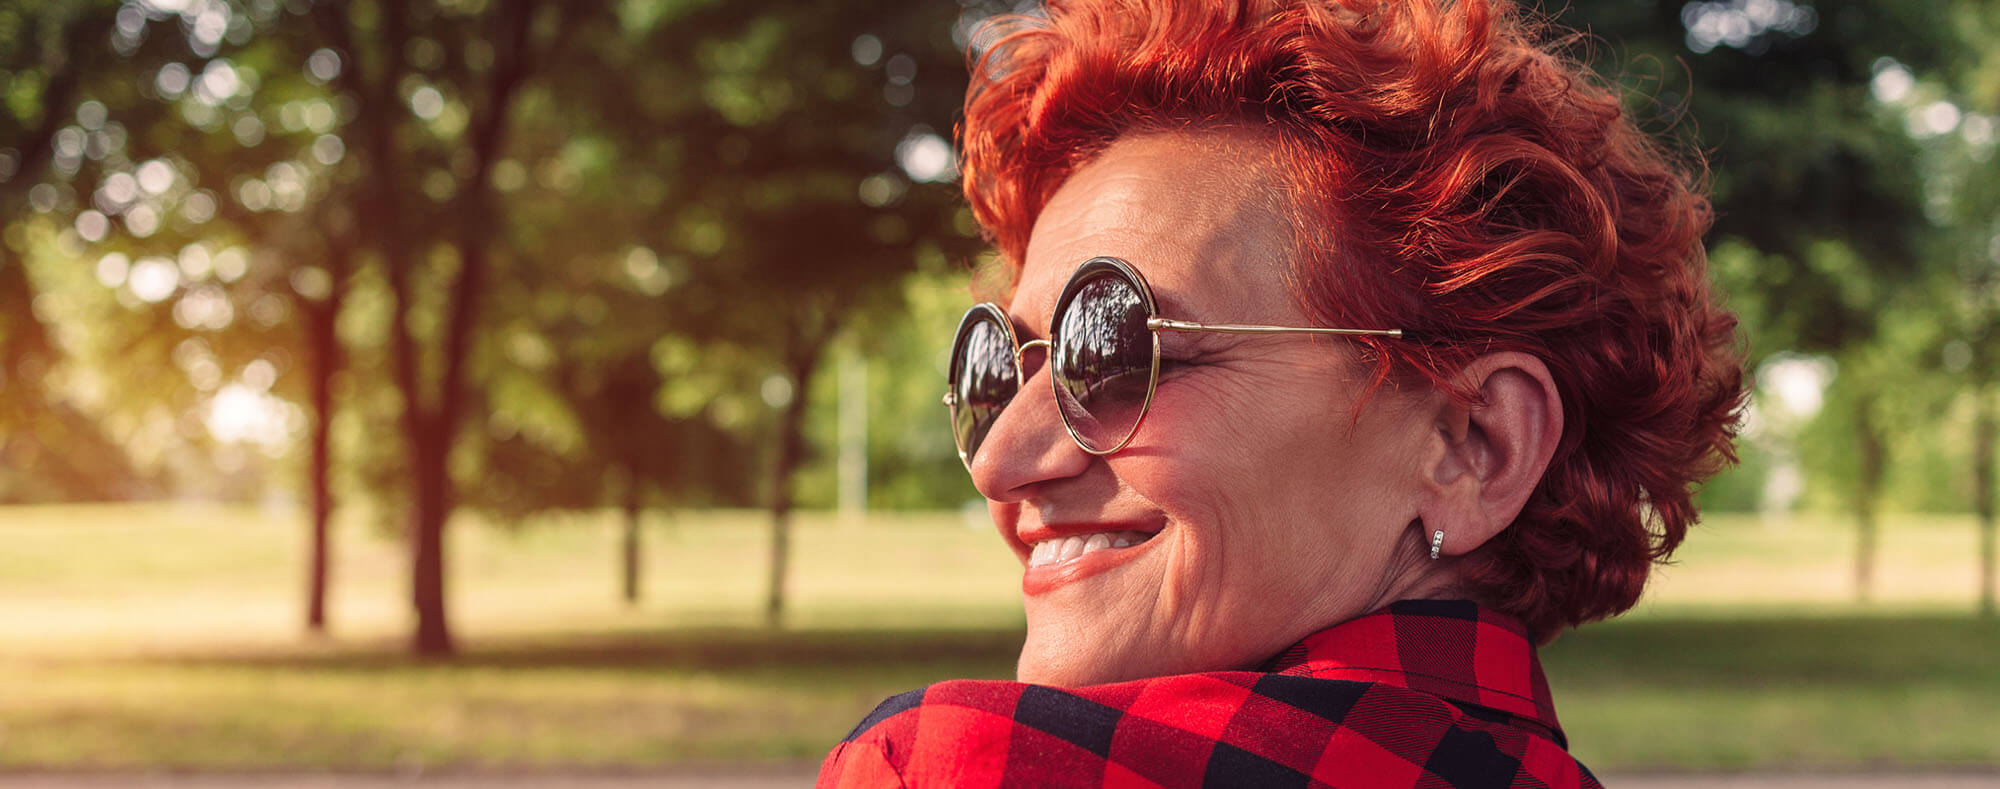 Smiling mature woman wearing sunglasses in a sunny park